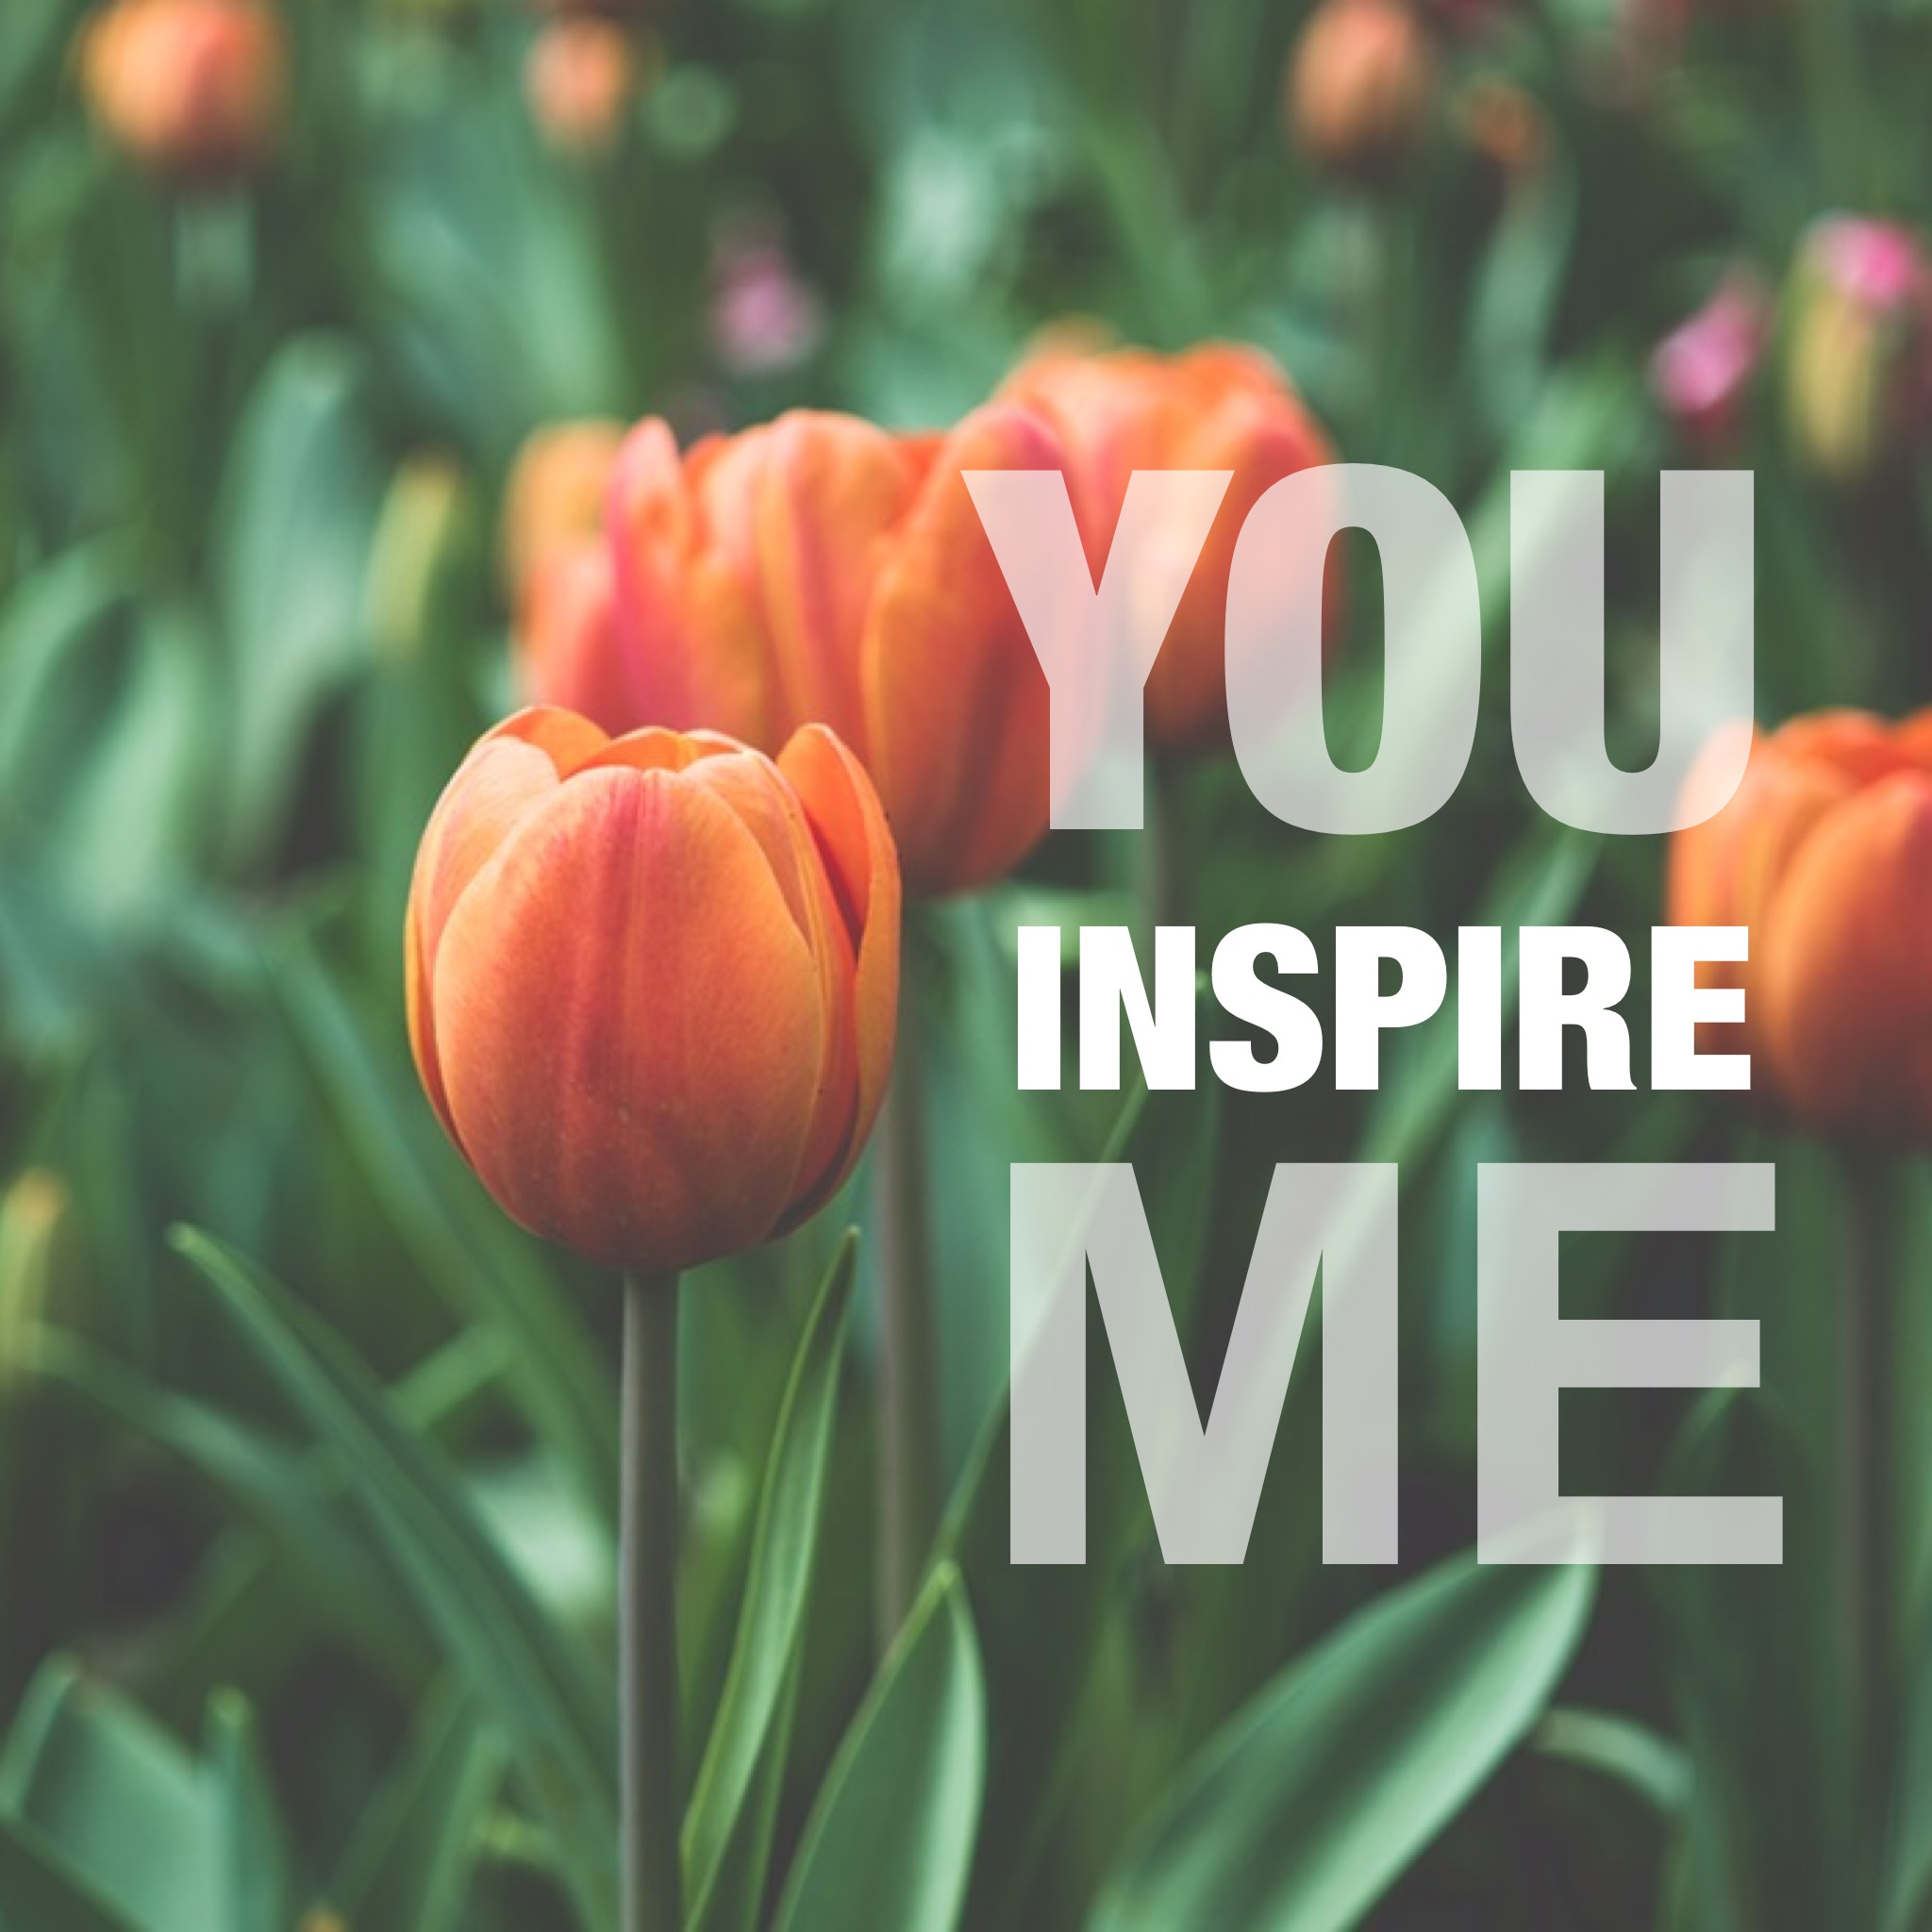 You inspire me quotes